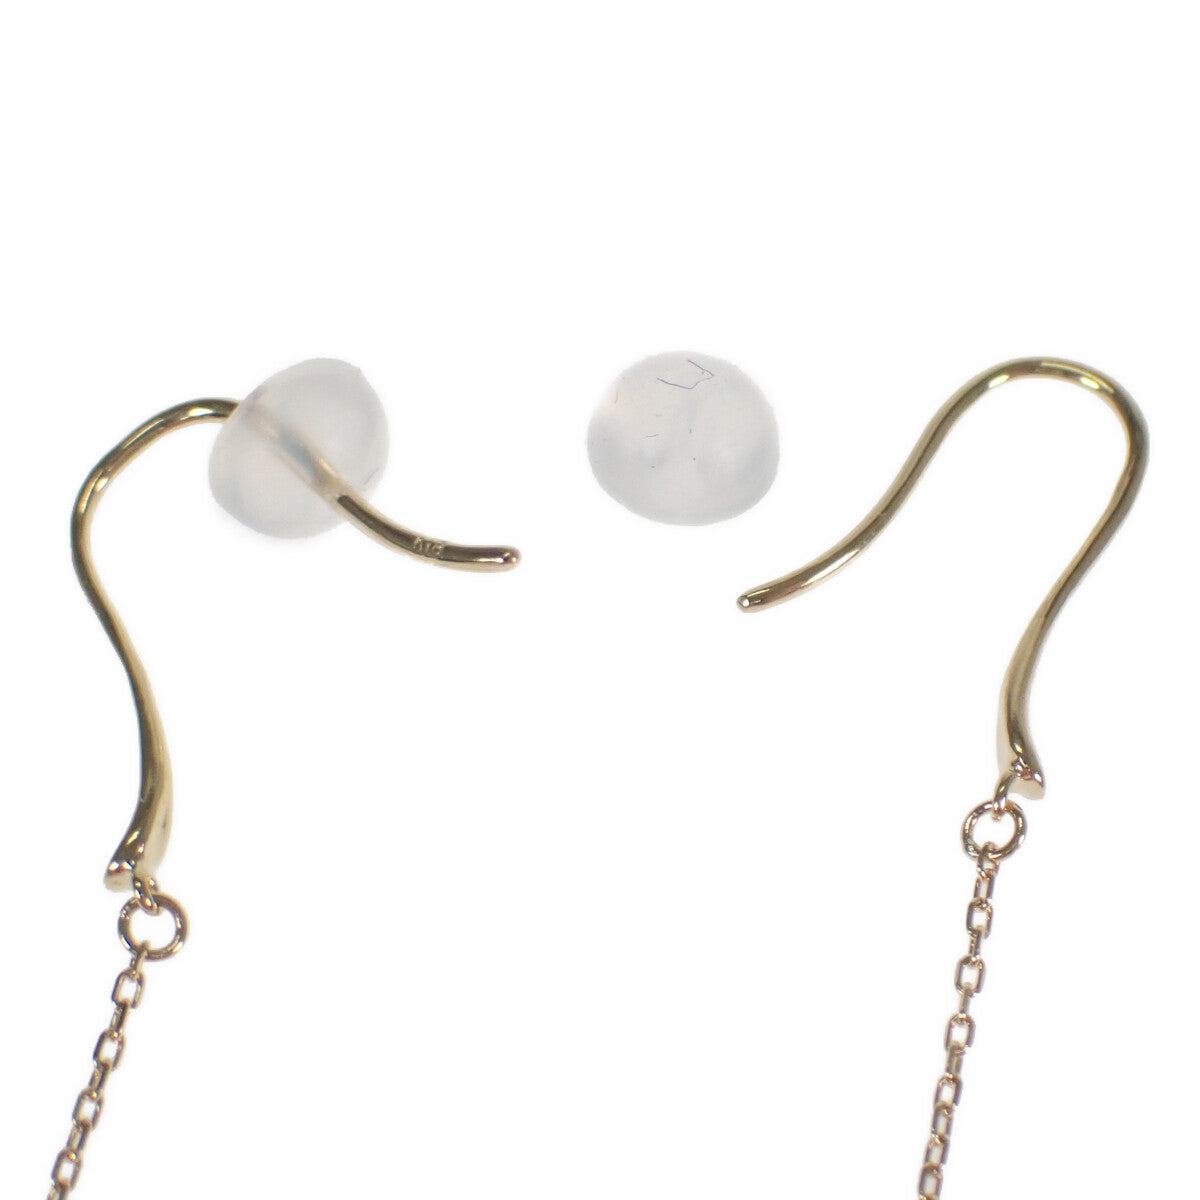 [LuxUness]  Ladies' K18YG Long Ball Design Gold Earrings – Used in Excellent condition